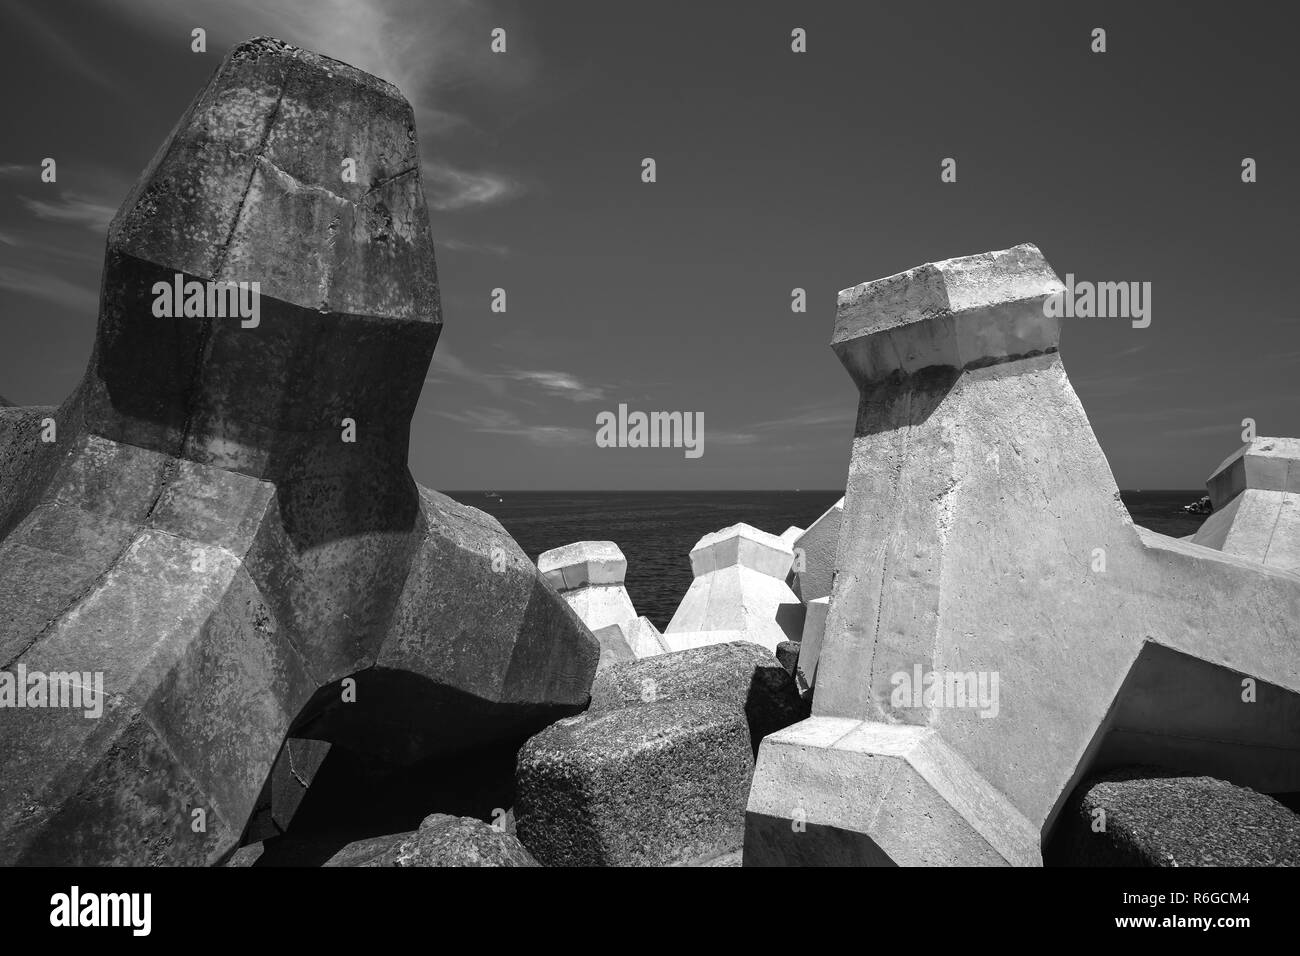 Breakwater blocks made of concrete are under dark sky. Black and white industrial background photo Stock Photo